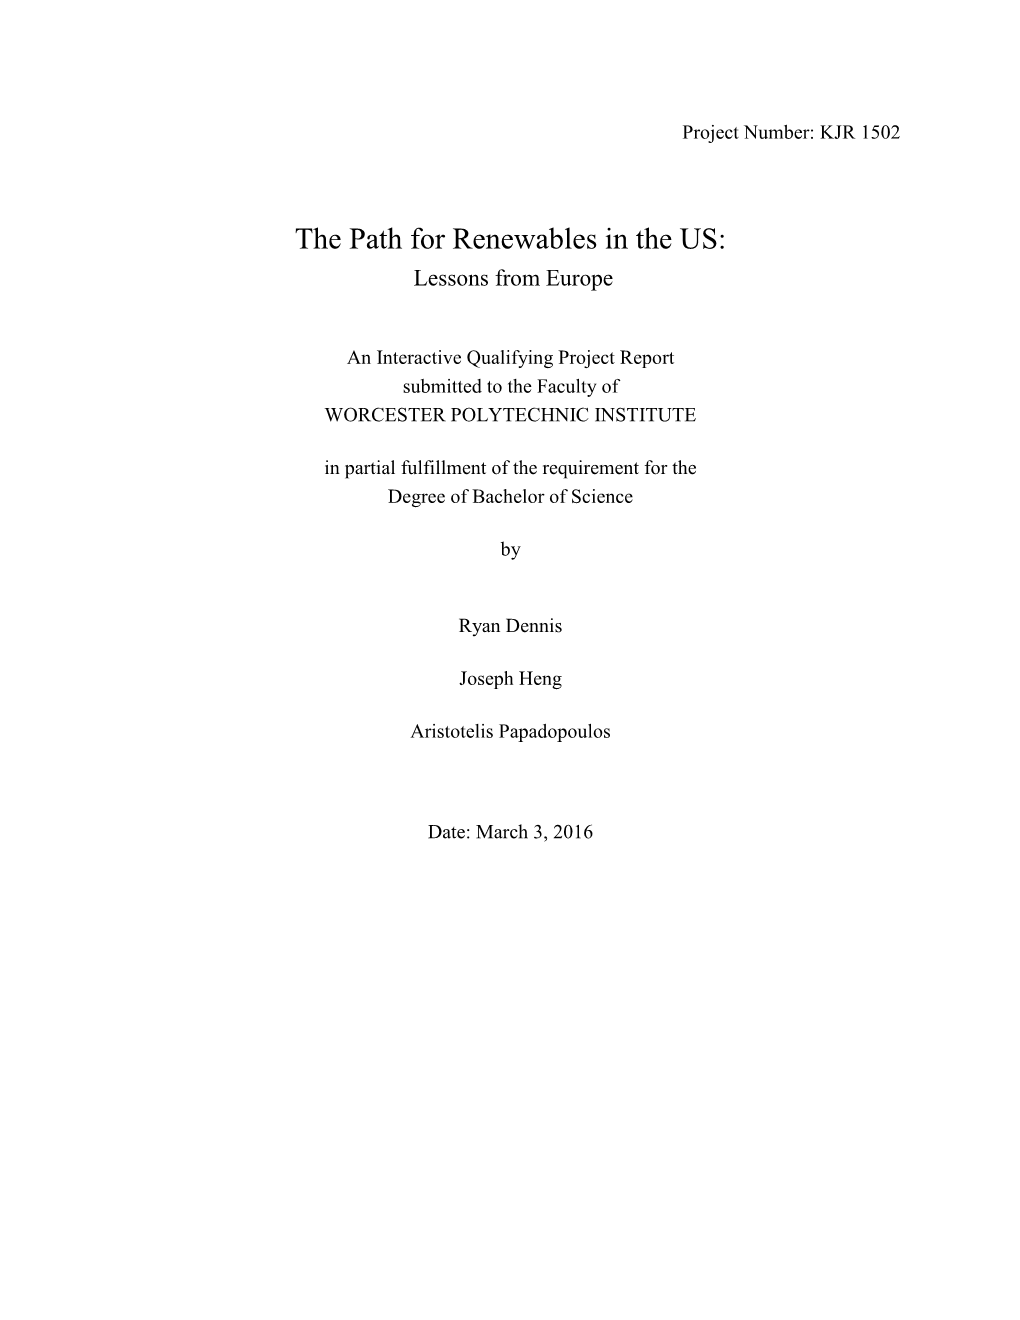 The Path for Renewables in the US: Lessons from Europe